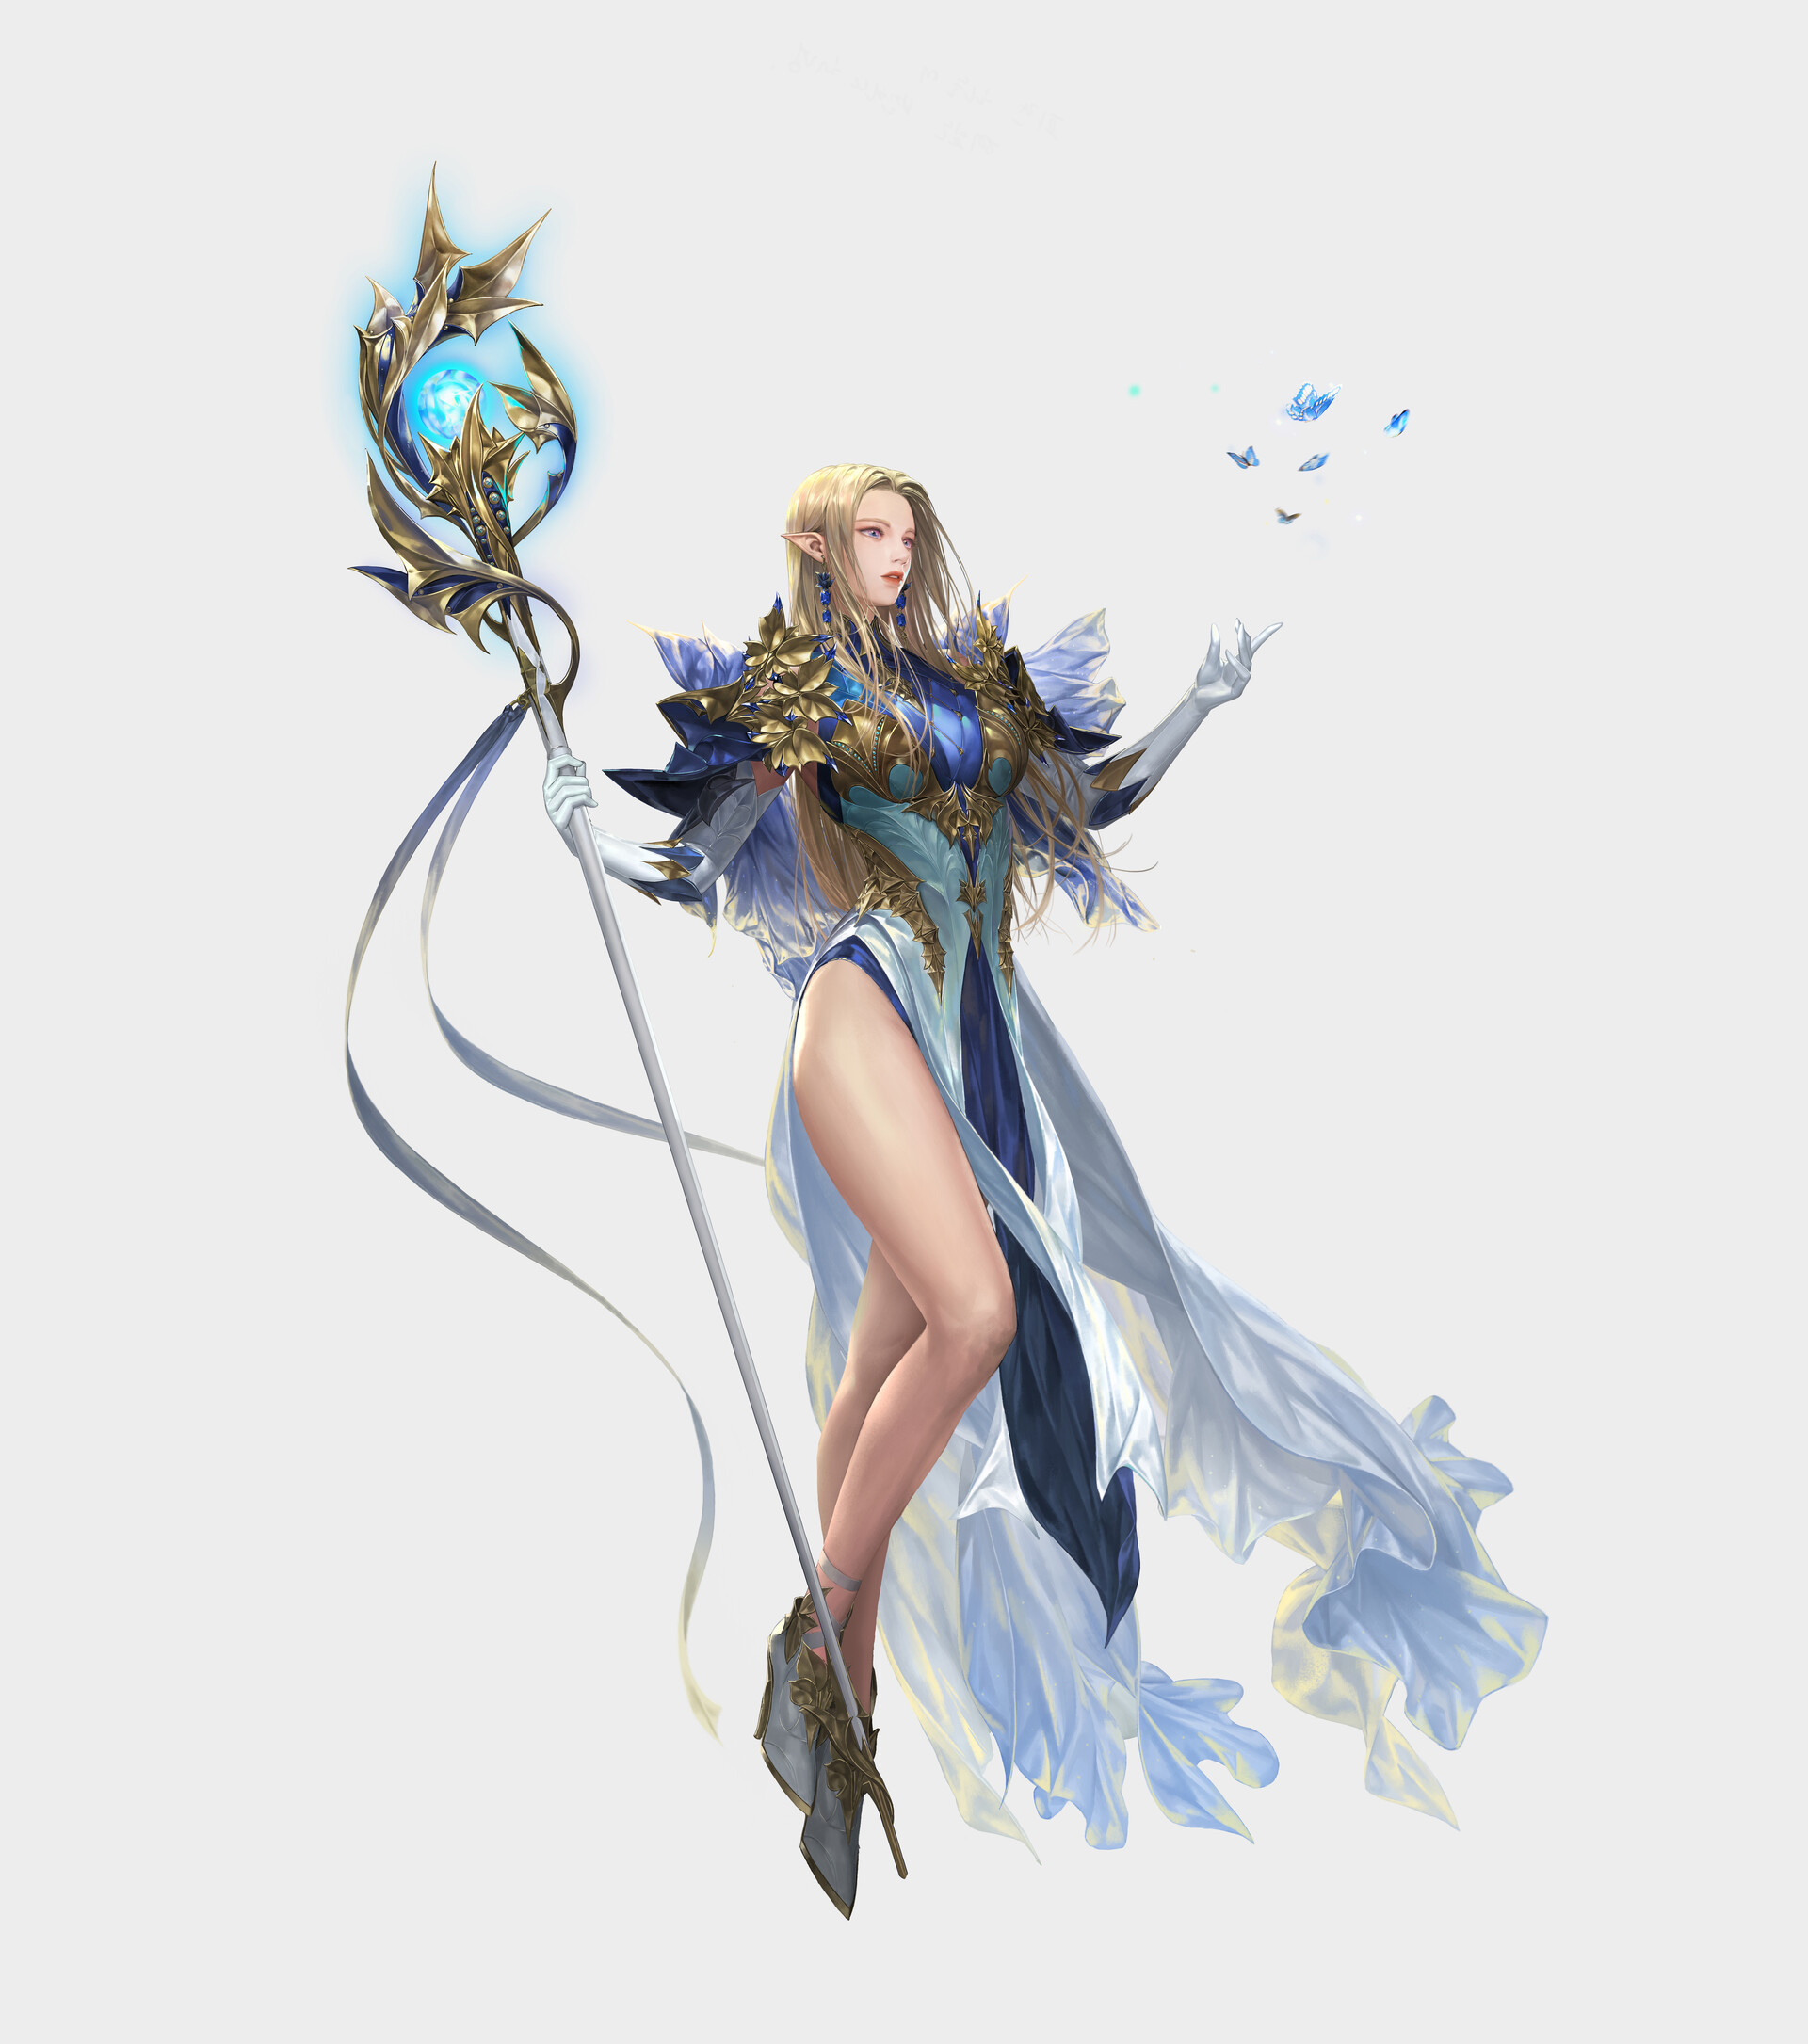 General 1920x2171 Daeho Cha drawing women blonde long hair dress fantasy art weapon staff floating simple background white background